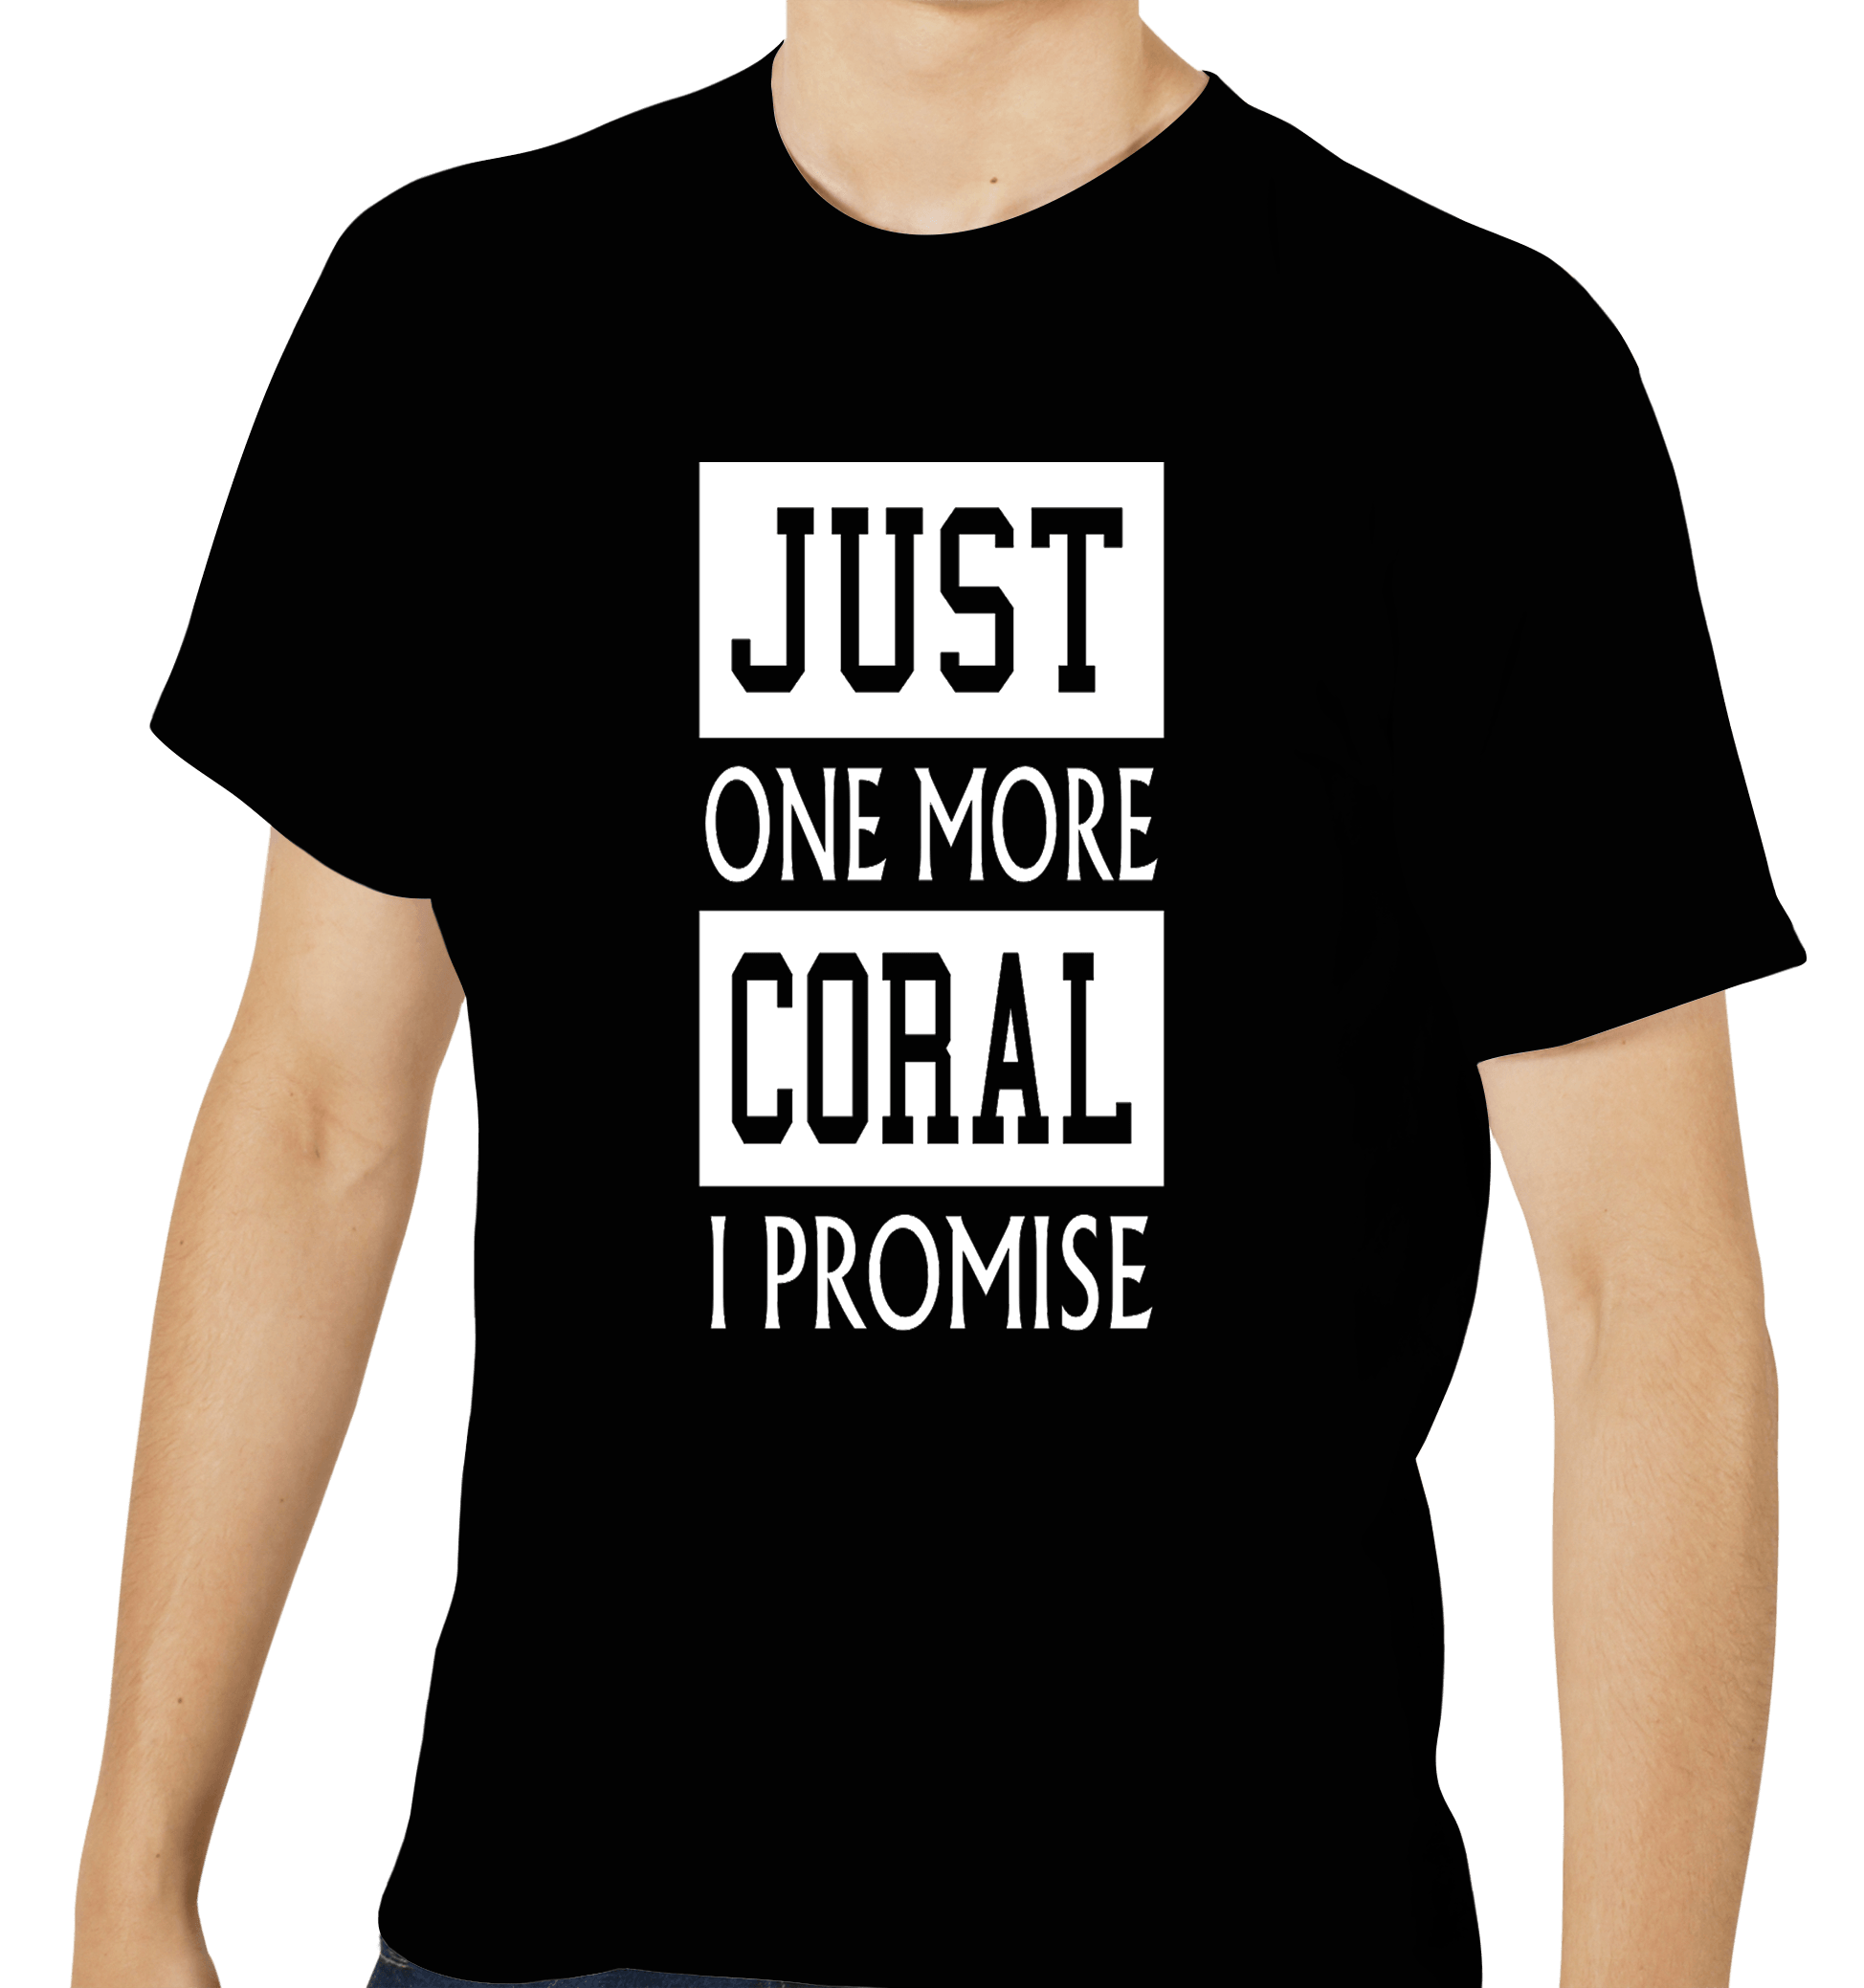 Just One More Coral I Promise T-Shirt Black - SaltCritters